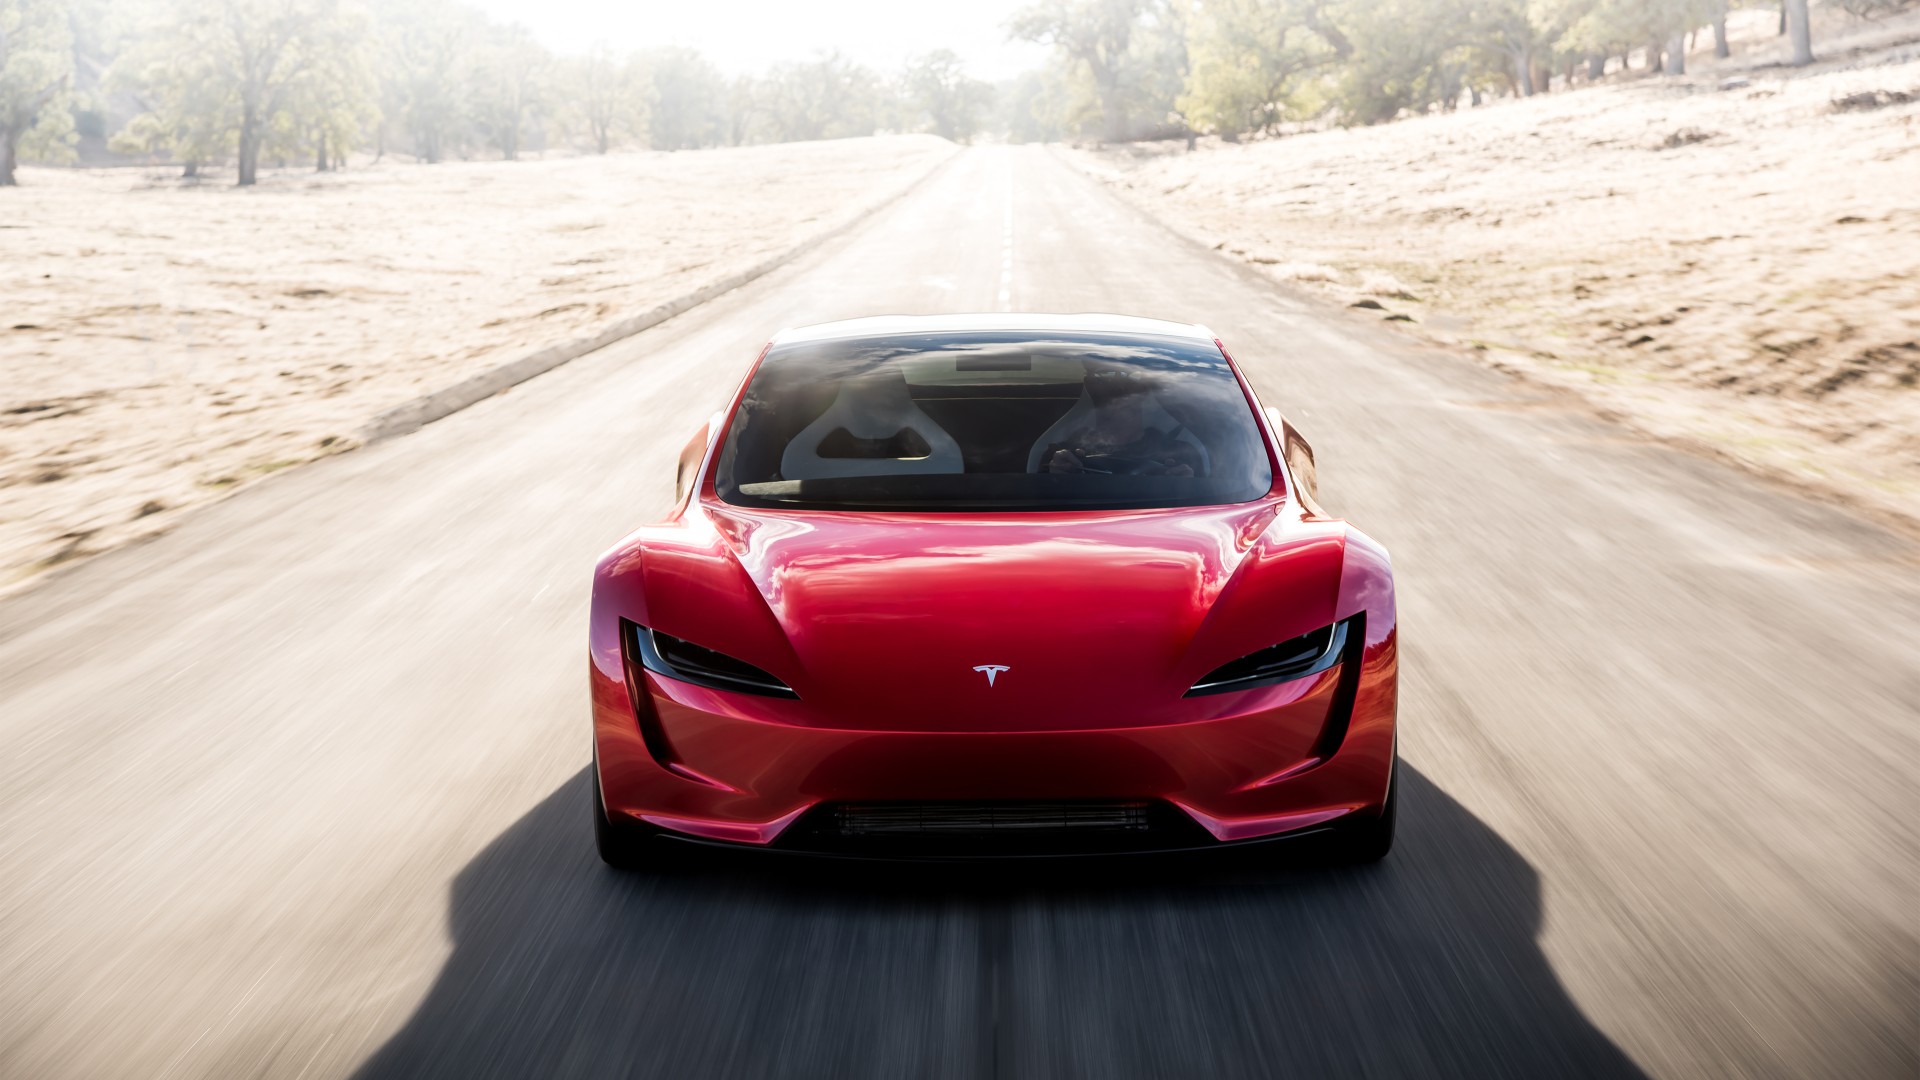 Tesla is accelerating the world's transition to sustainable energy with electric cars, solar and integrated renewable energy solutions for homes and businesses. 2020 Tesla Roadster 4K 4 Wallpaper | HD Car Wallpapers